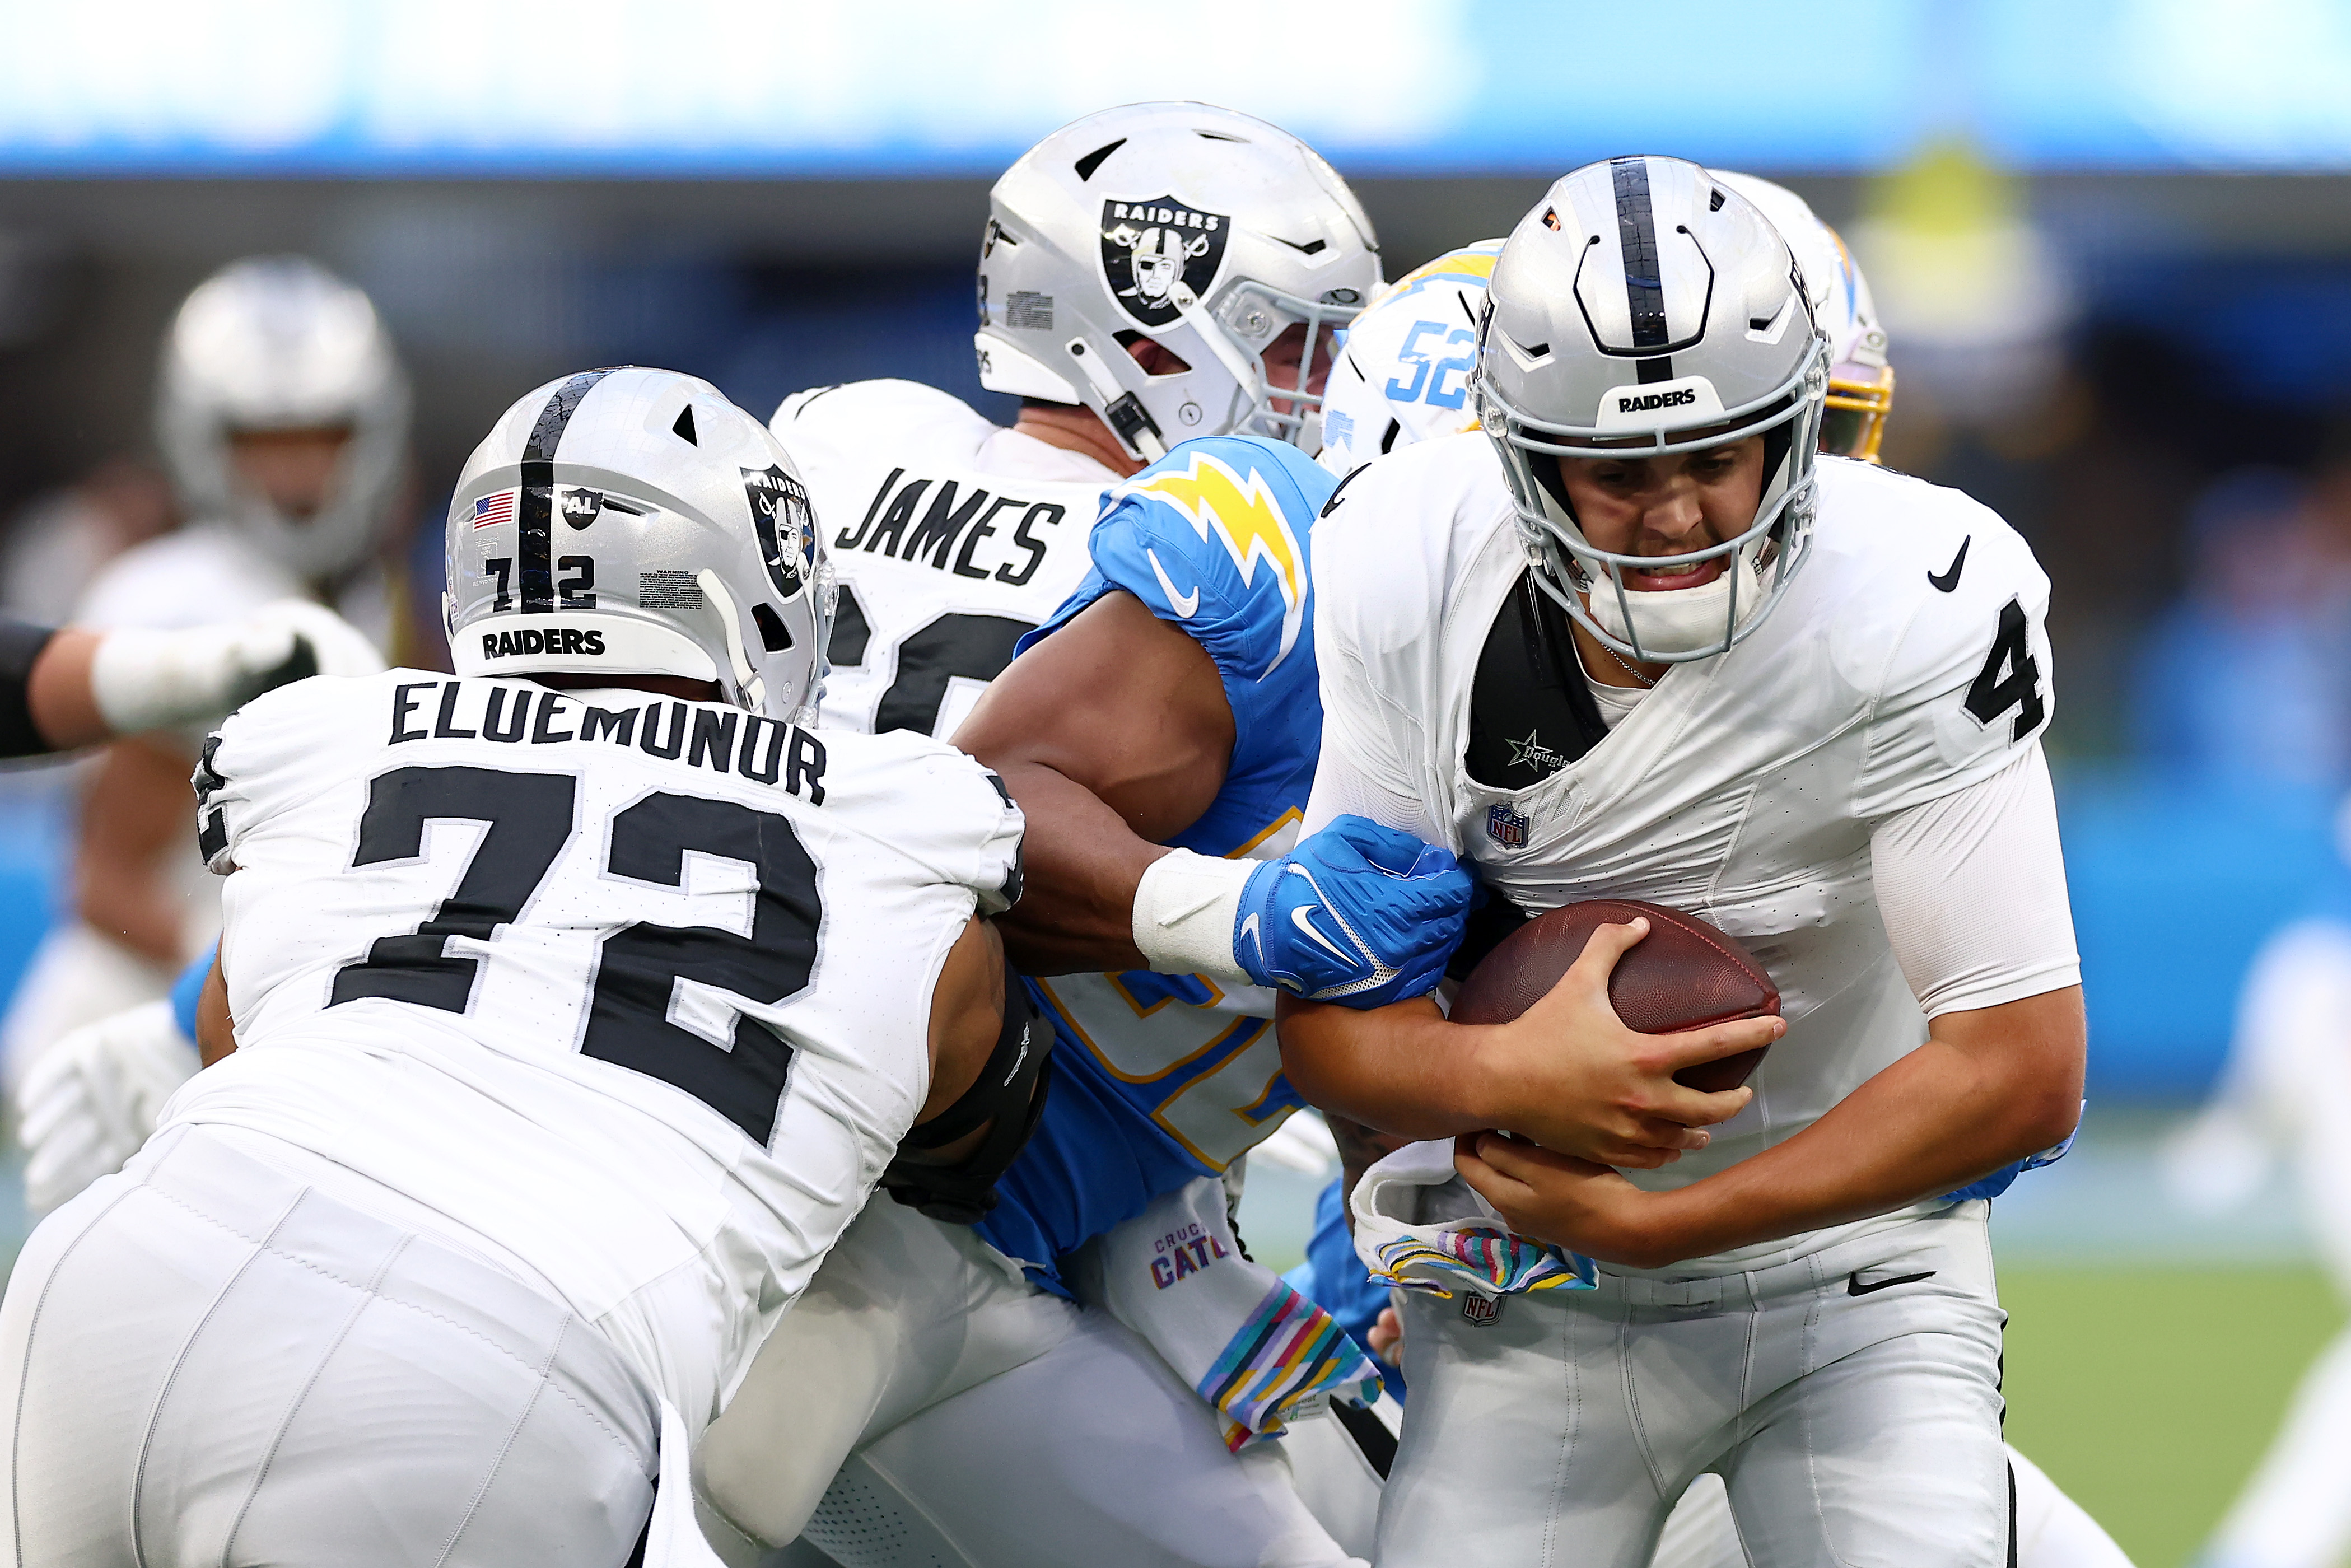 Former Bear Khalil Mack sets the Chargers' sack record with 6 against the Raiders